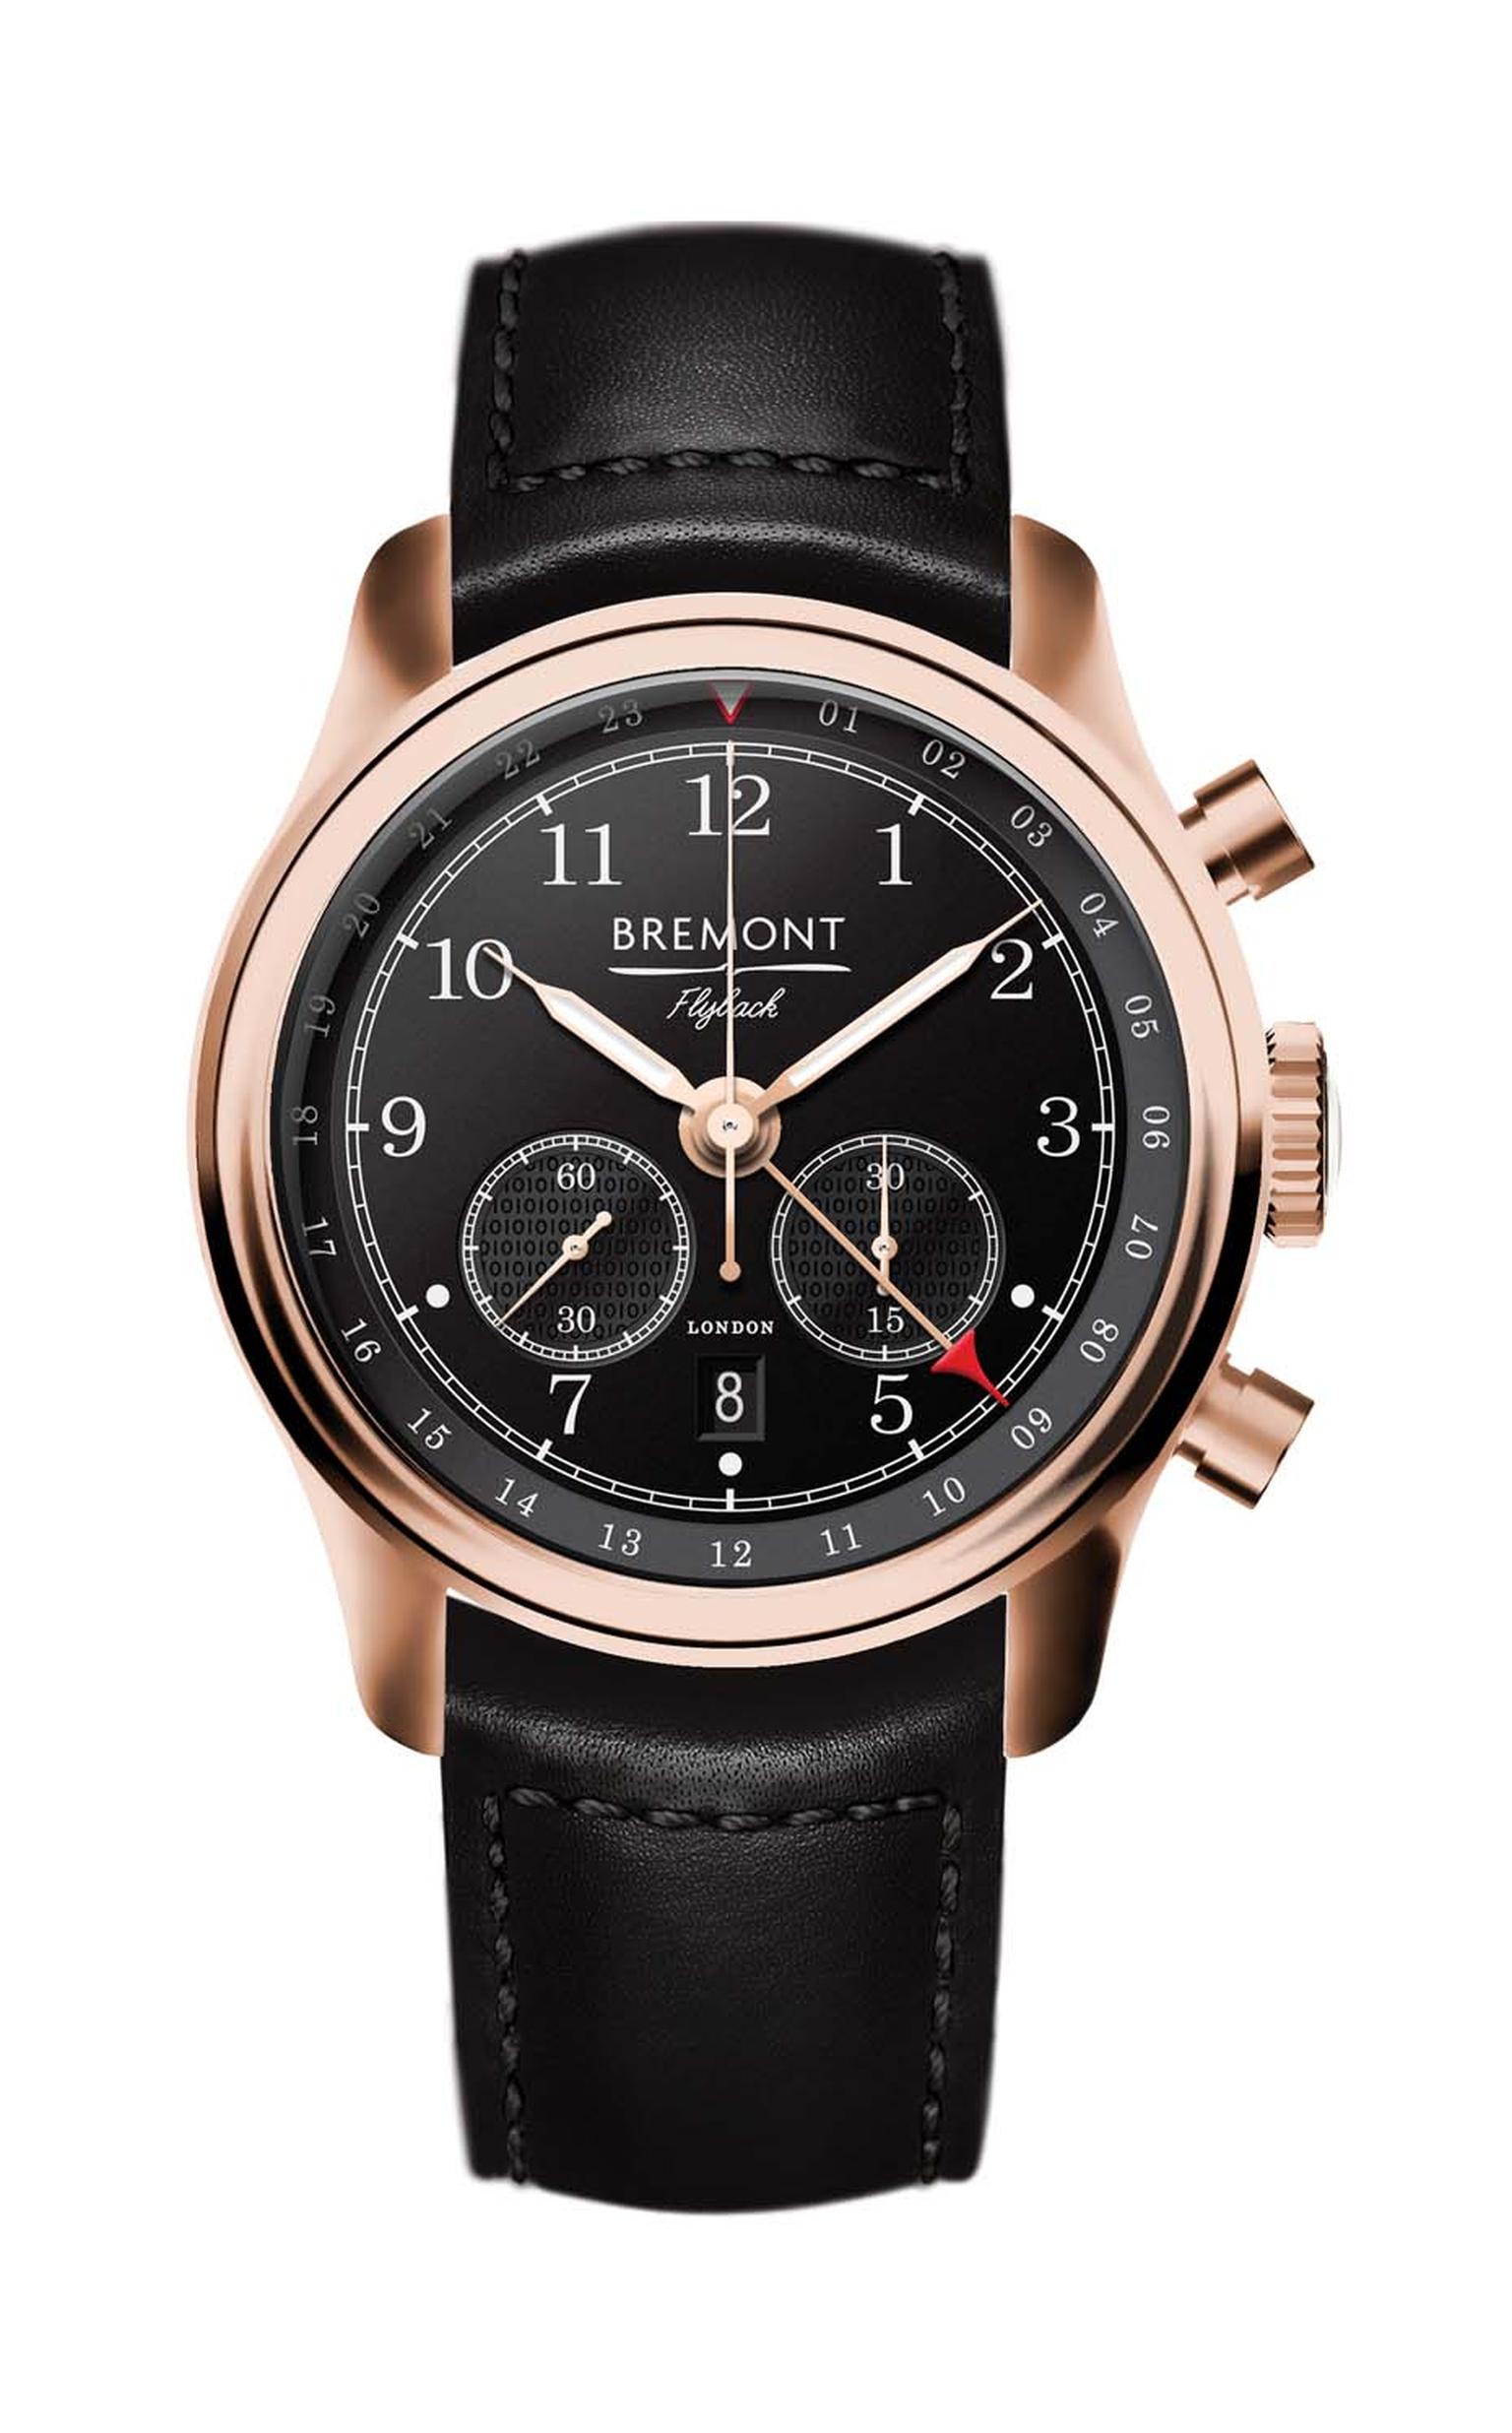 Bremont's Codebreaker flyback chronograph pays tribute to the team of codebreakers at Bletchley Park during WWII.